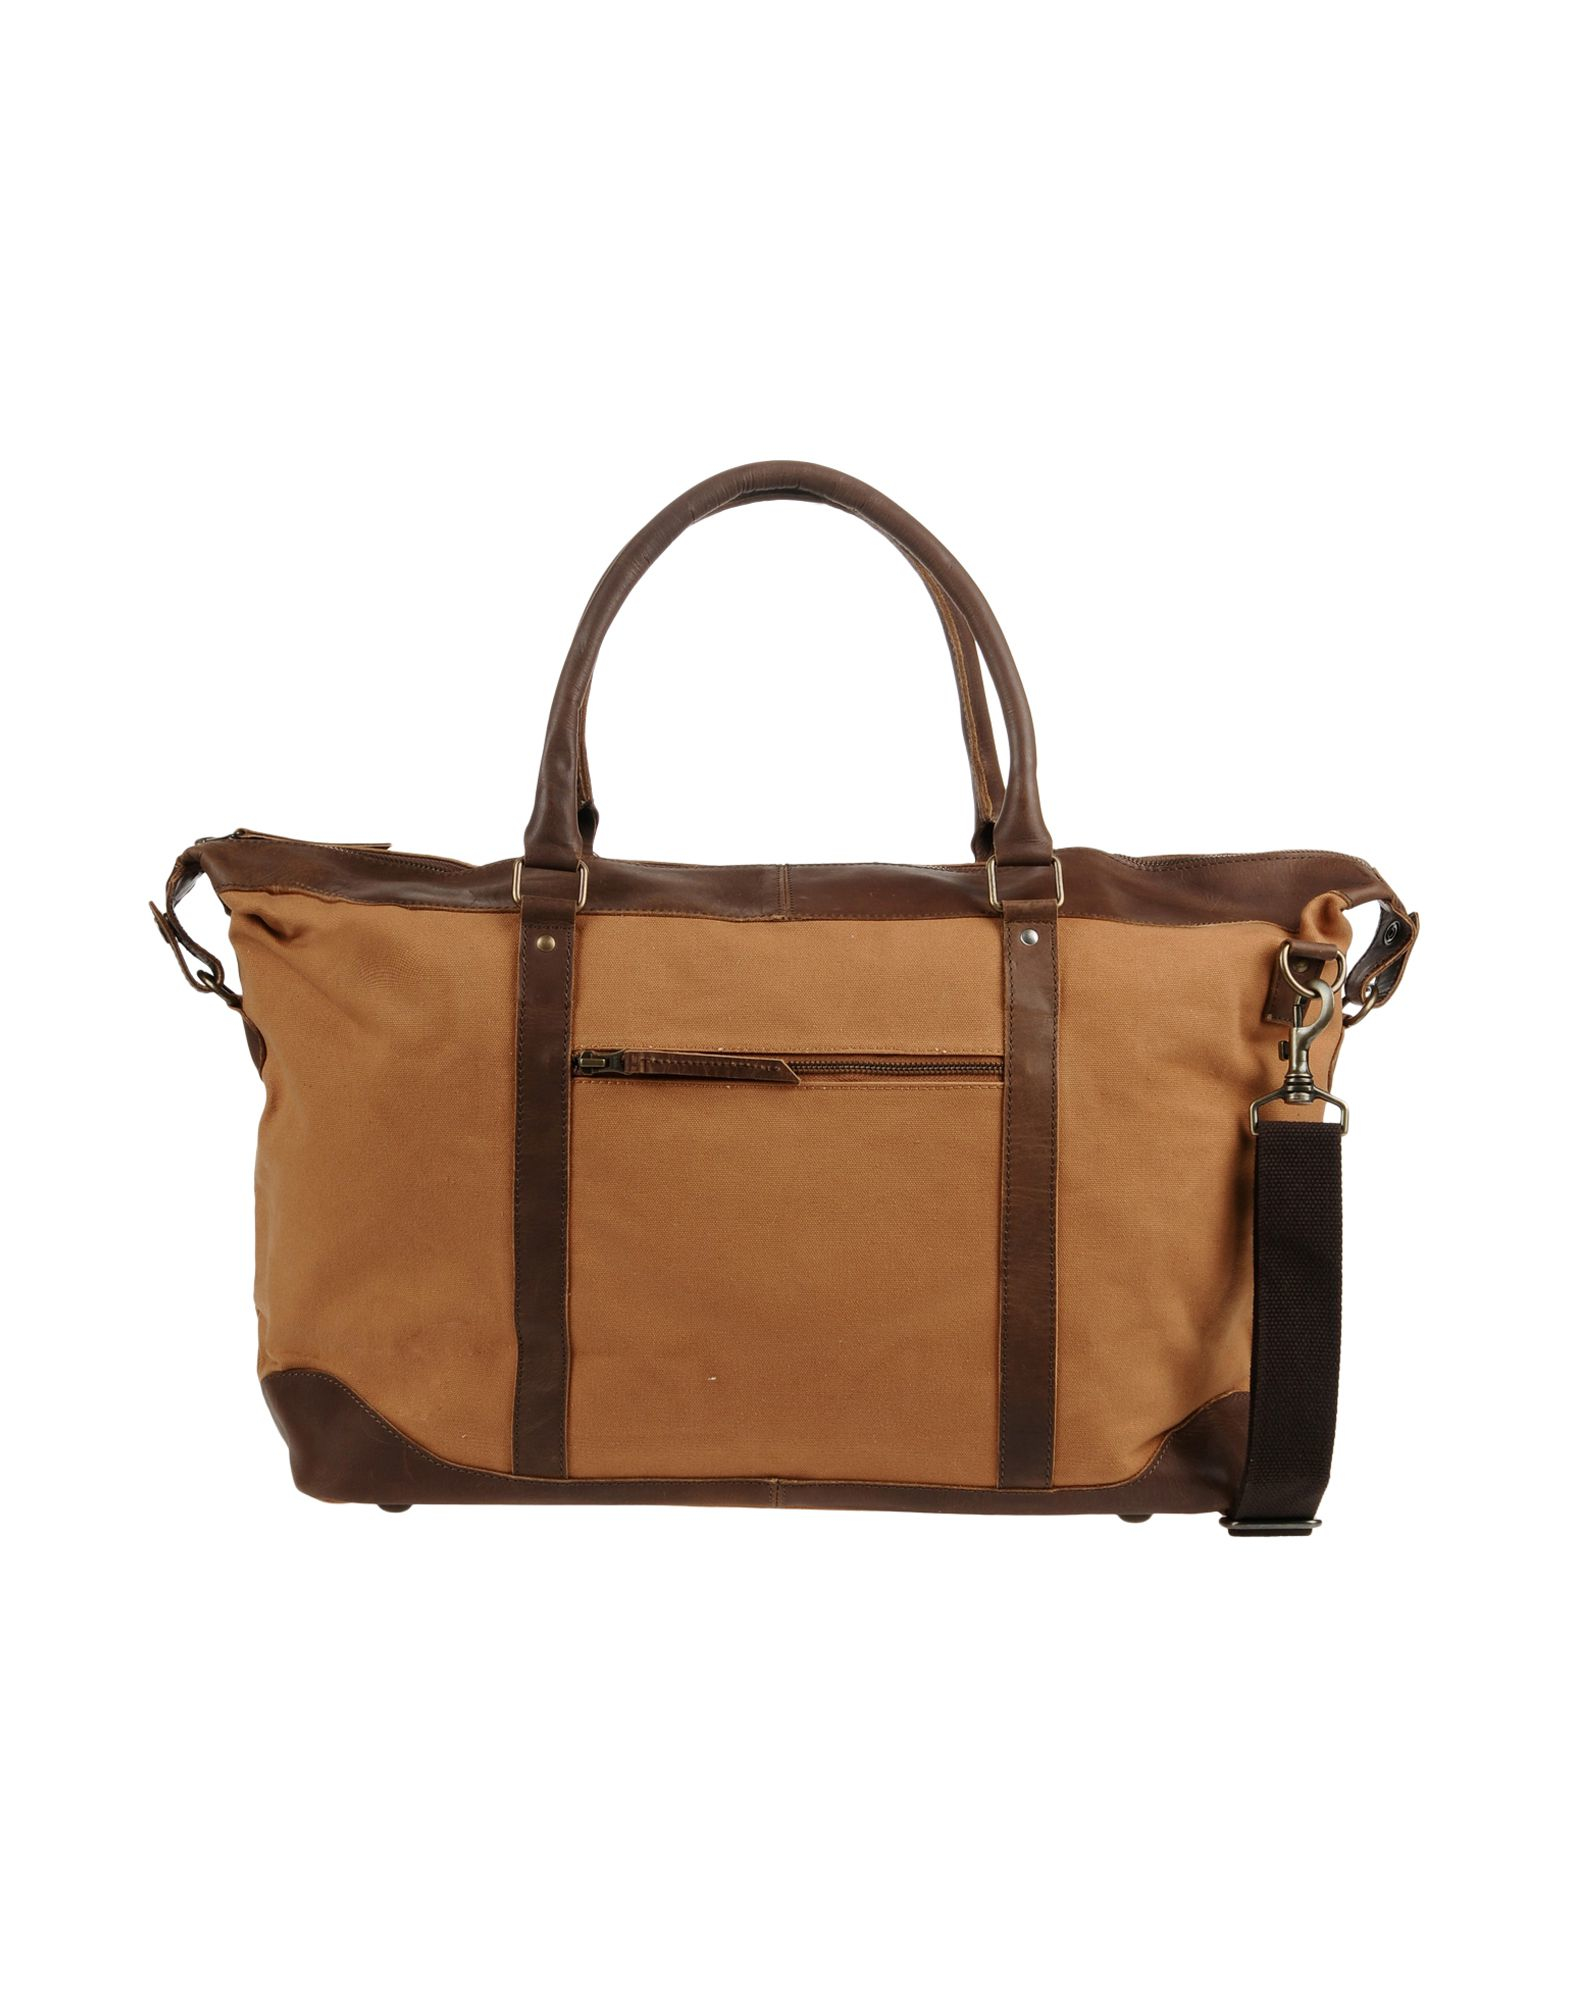 Lyst - United By Blue Travel & Duffel Bag in Brown for Men